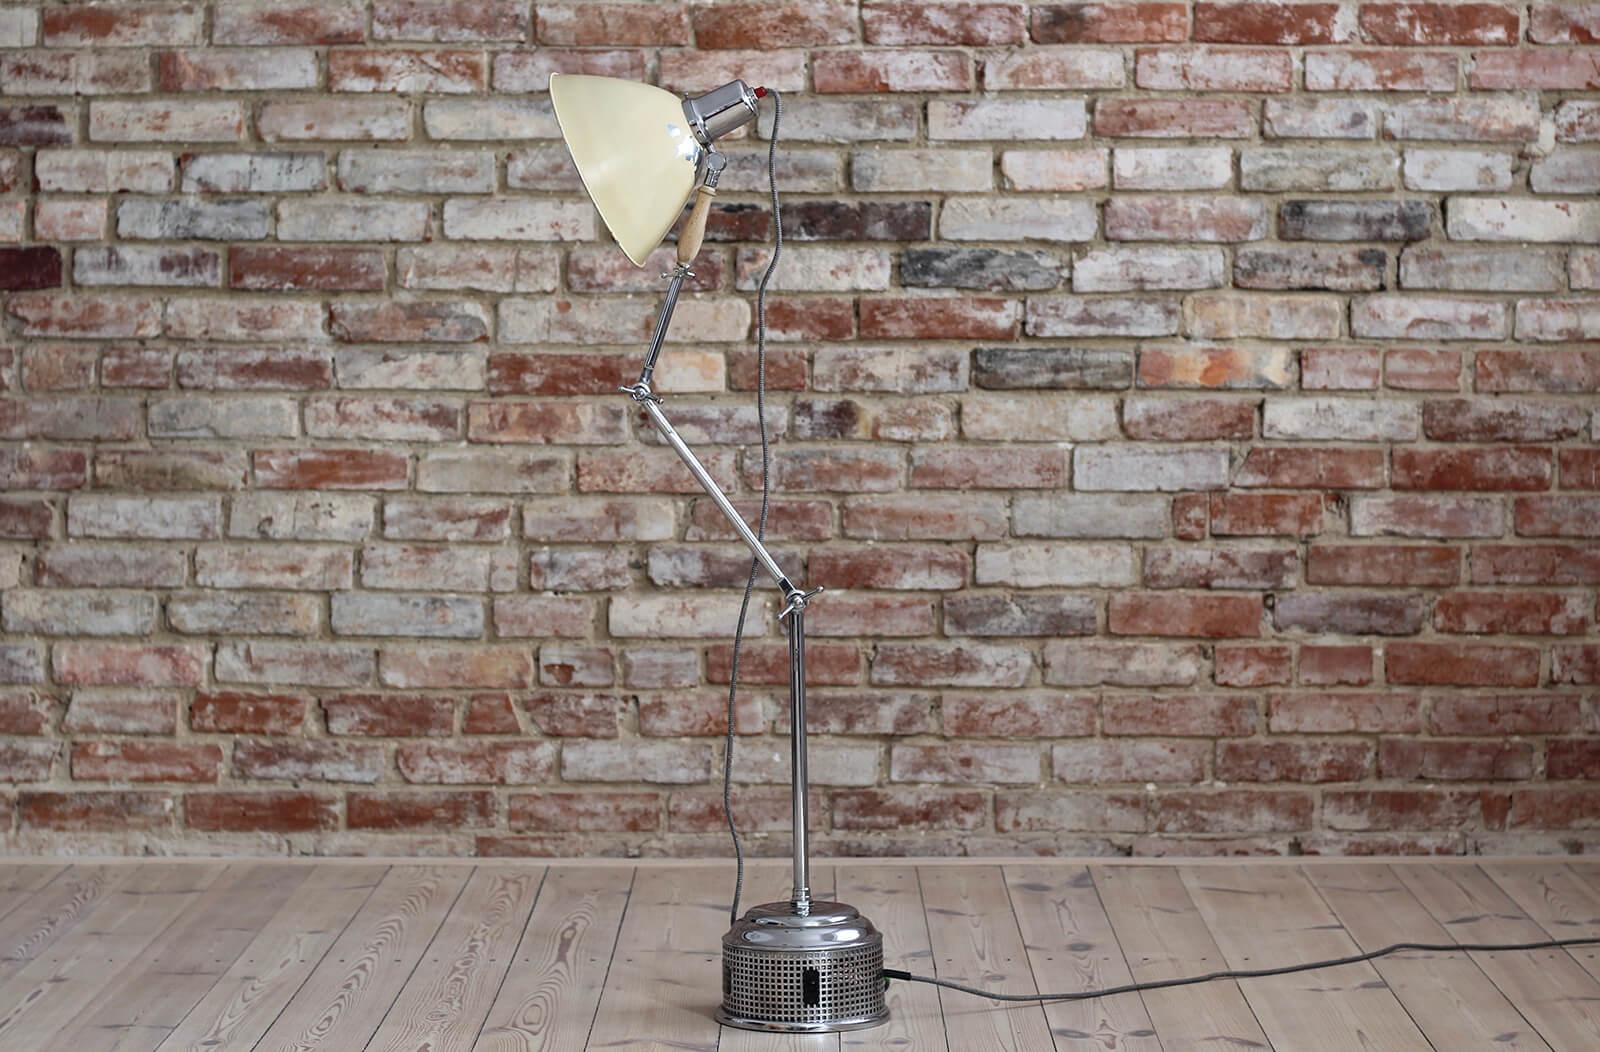 Very rare vintage medical lamp by British manufacturers „Perihel”. Perihel was a highly successful manufacturer of light therapy lamps for both professional and home use, manufacturing elegant light therapy lamps for the clinic and the home. Their